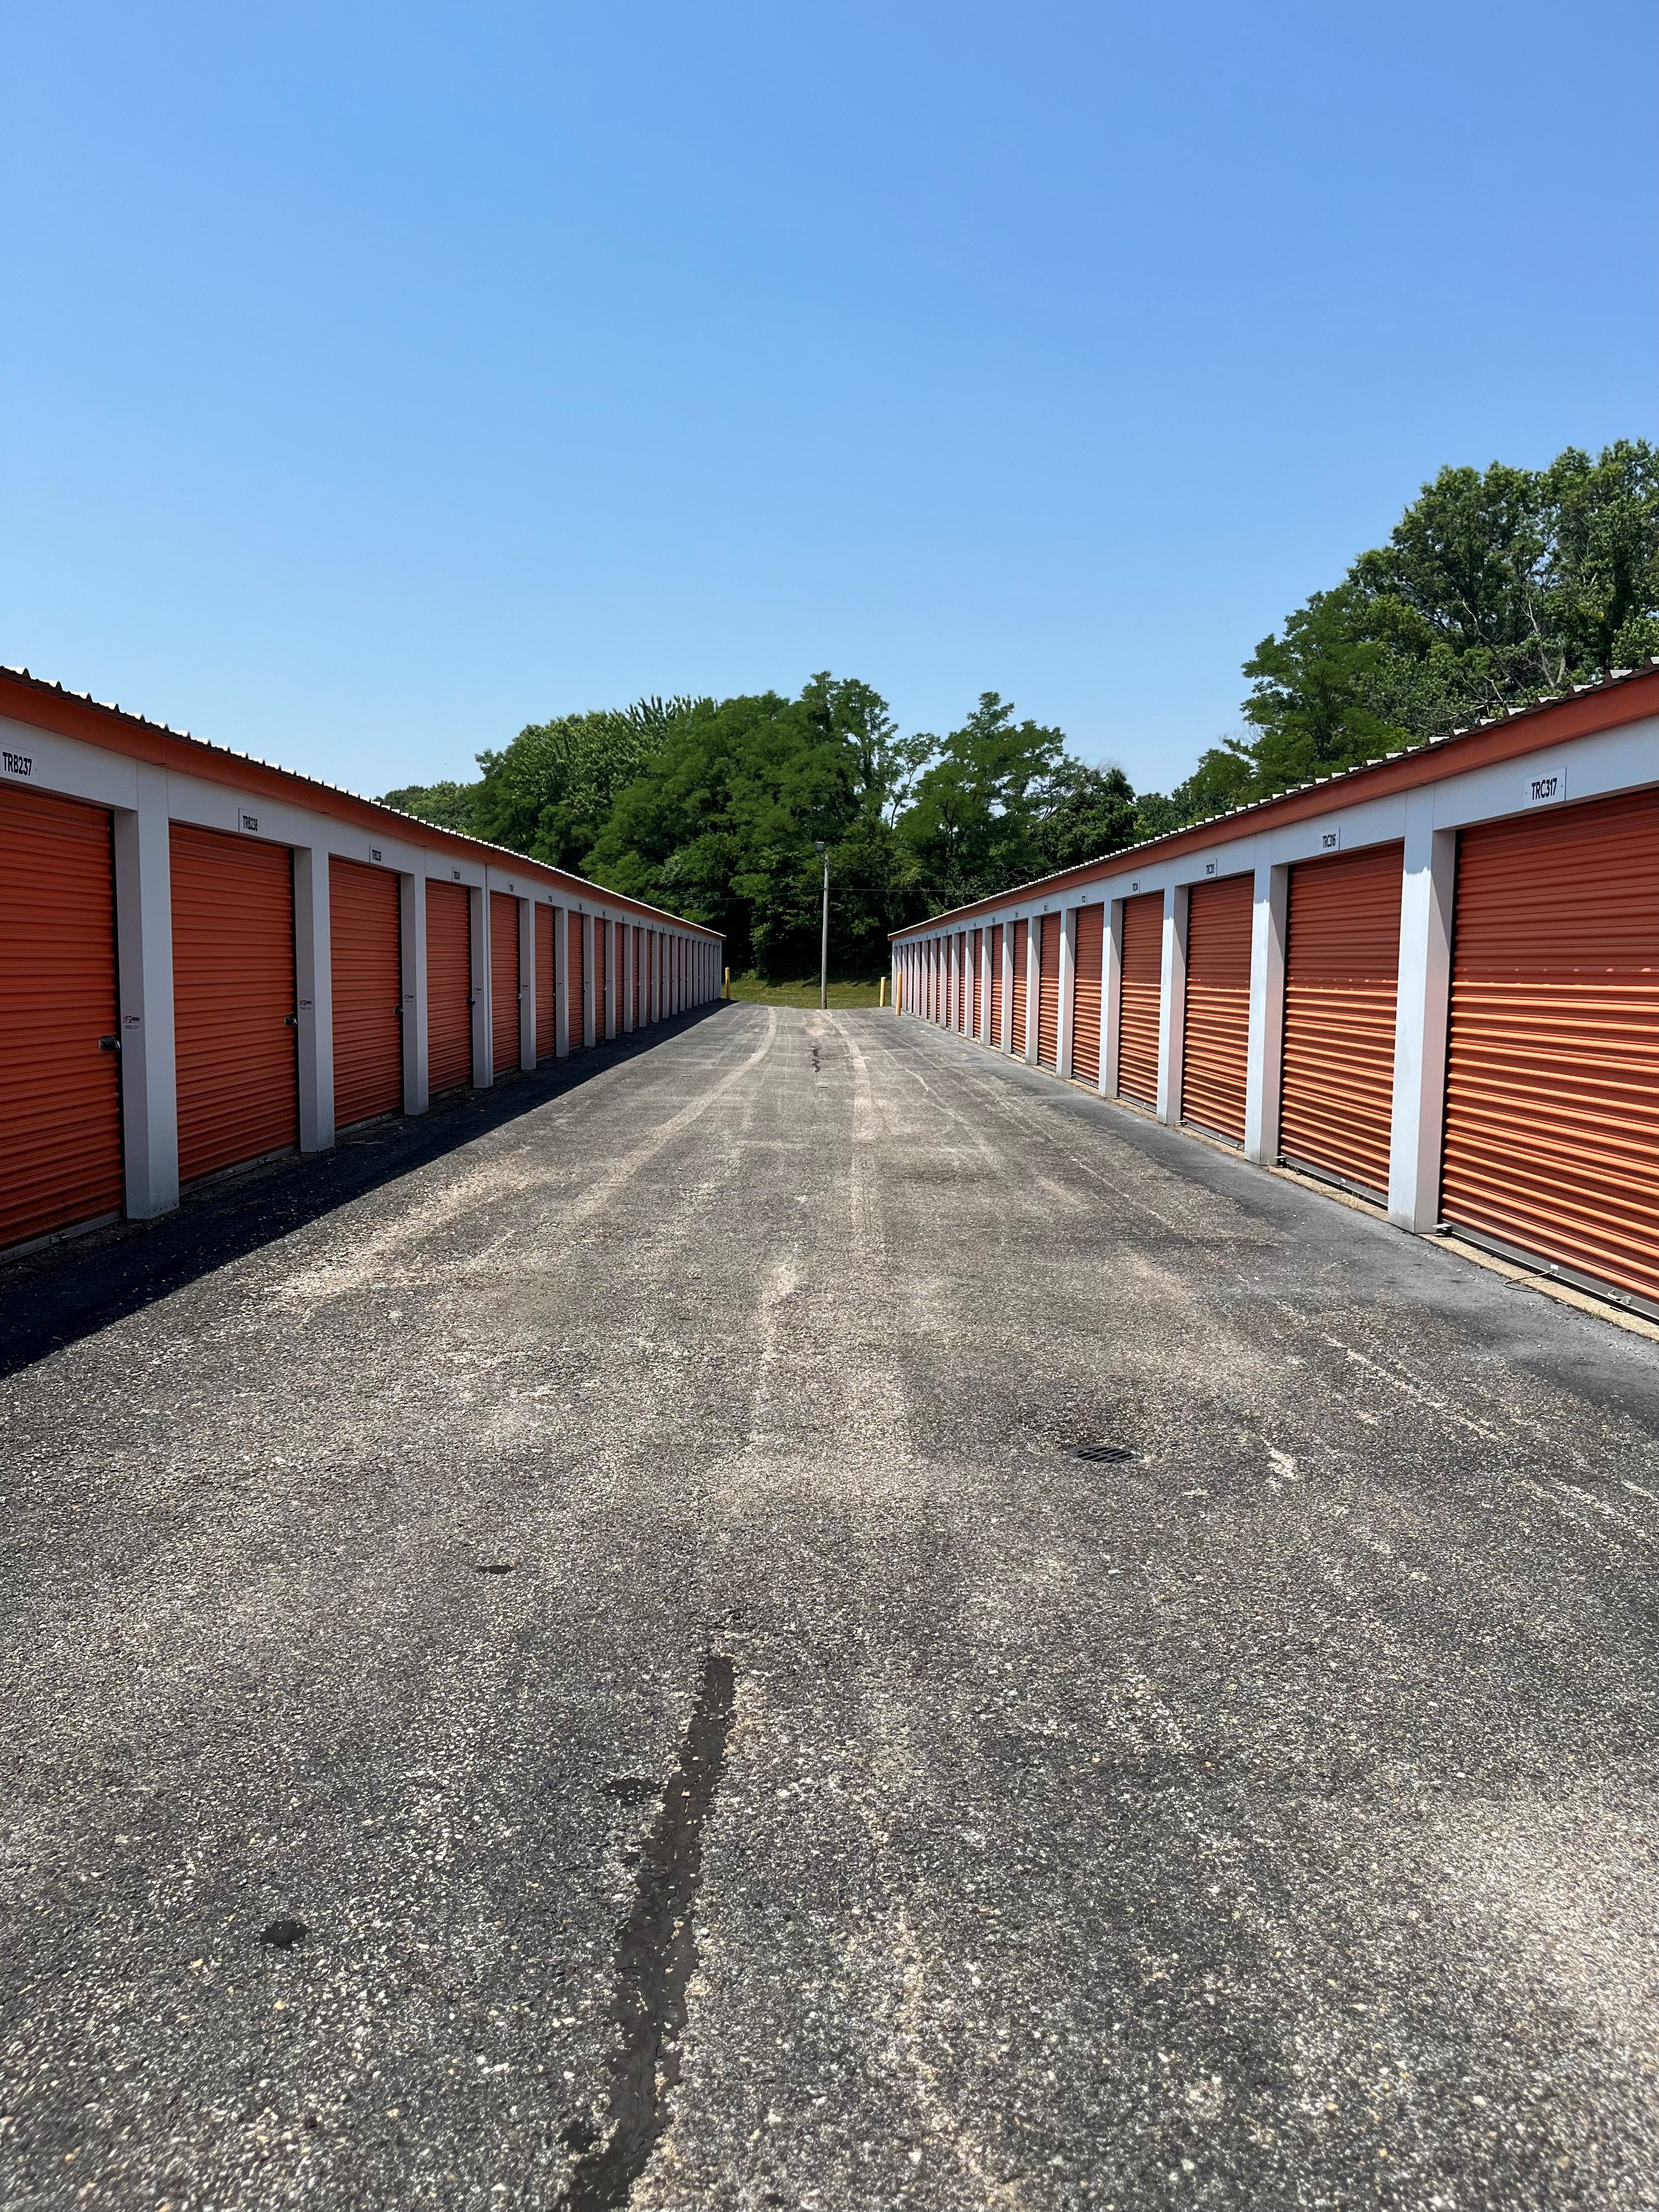 Truman Rd, Jasper, IN: Drive-up storage units with white doors, set along clean, paved, and wide driveways for easy access.